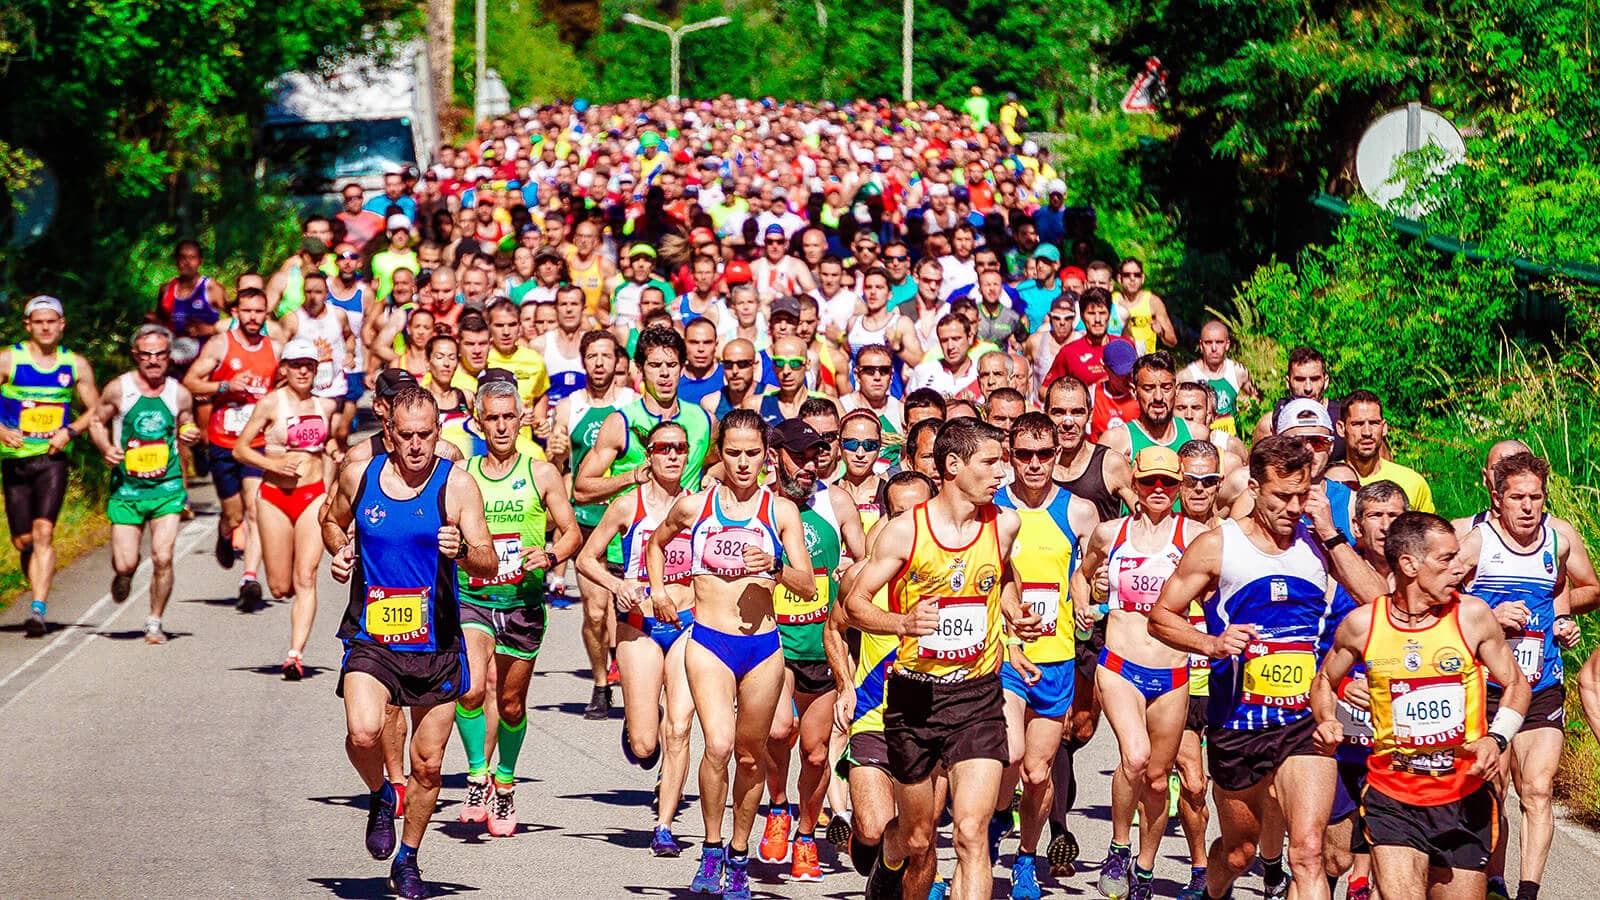 Runners taking part in a mass event